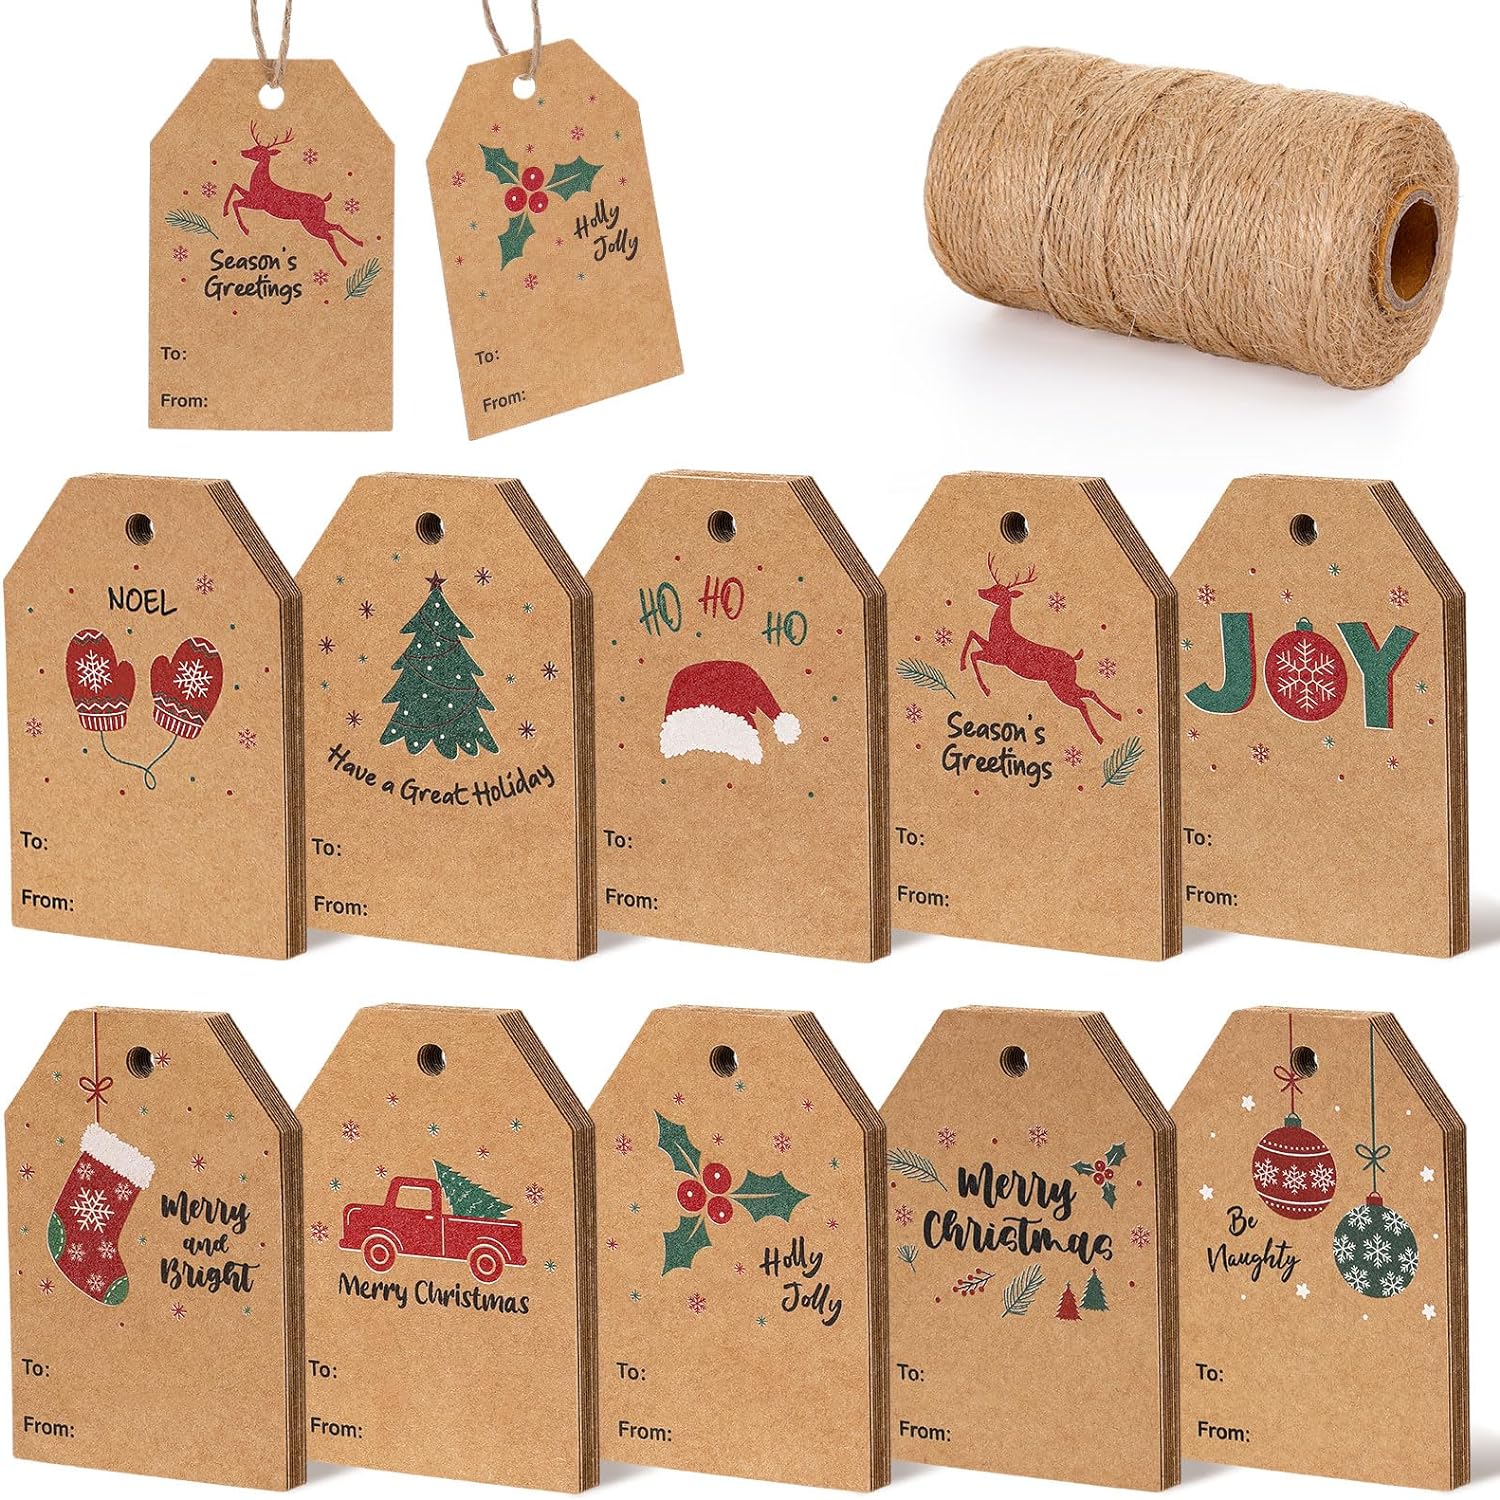 Blisstime 328 Feet Natural Jute Twine and 100PCS Christmas Gift Tags, Kraft Paper Brown Price Tags Labels for Christmas Gift Wrapping